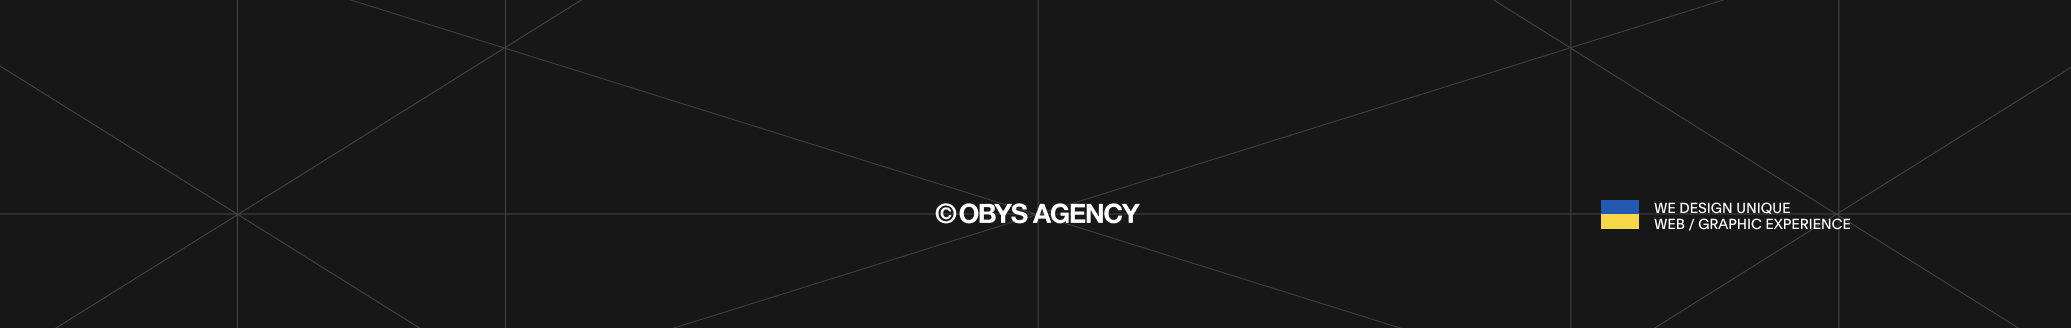 Obys Agency's profile banner